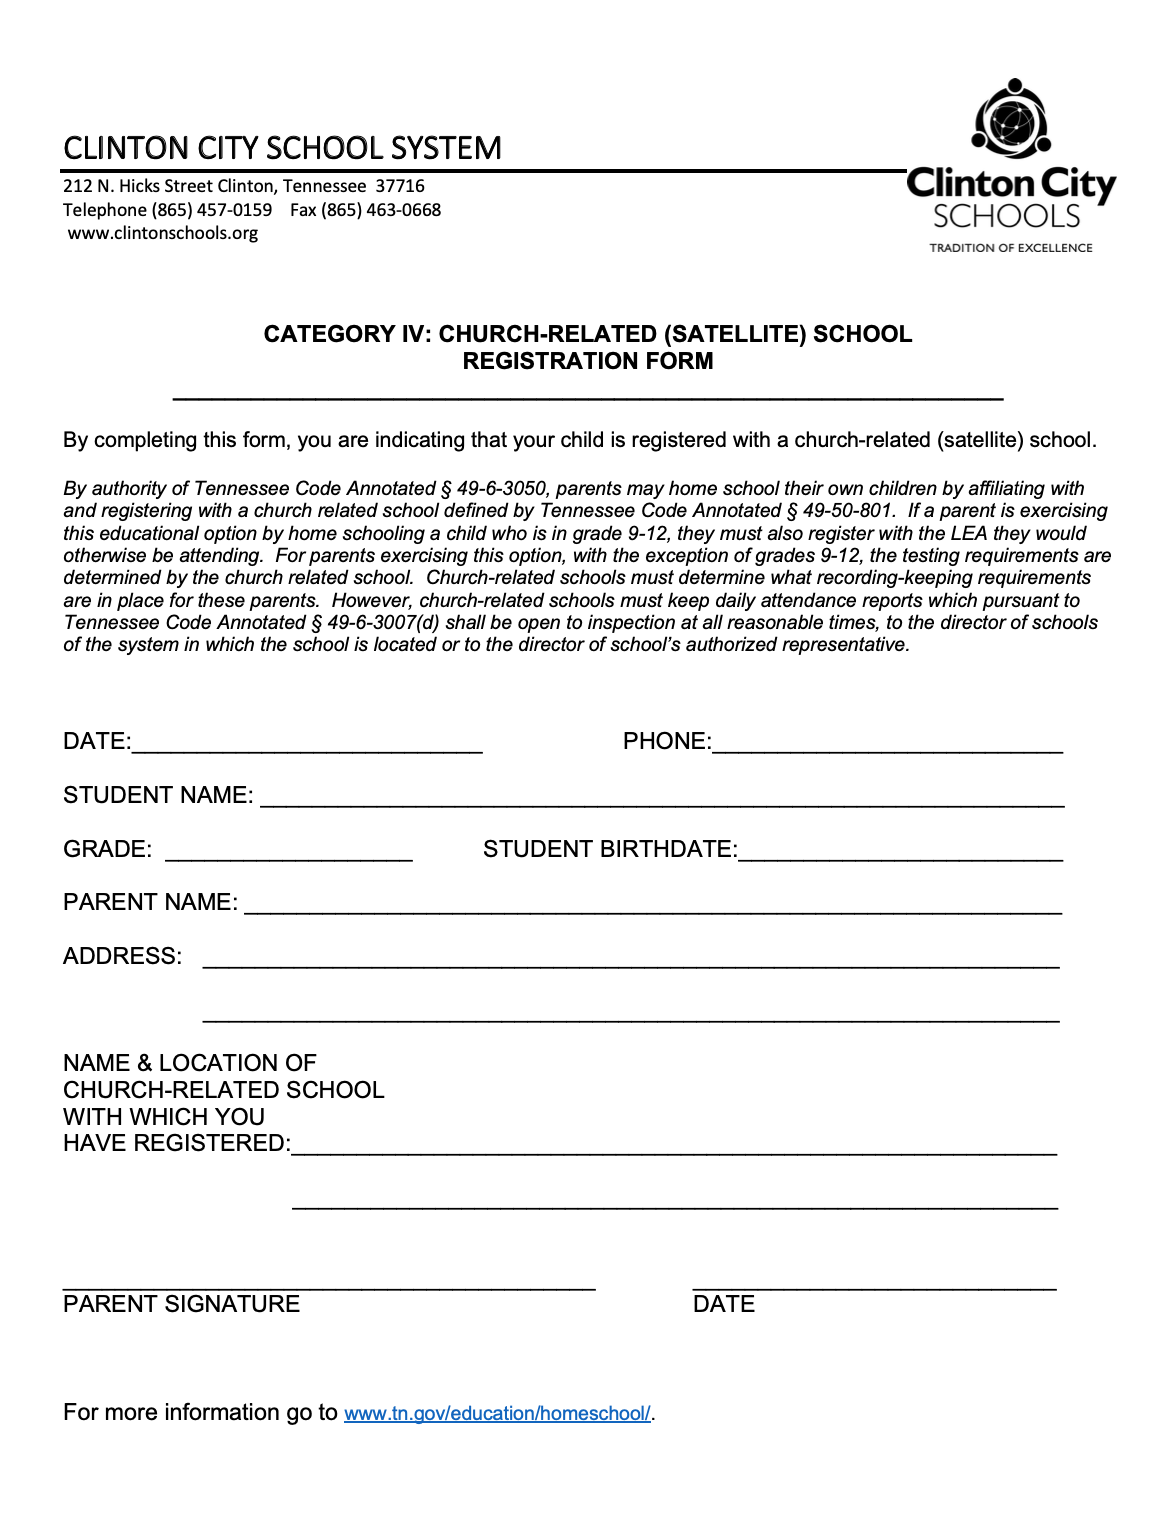 Church-Related Registration Form